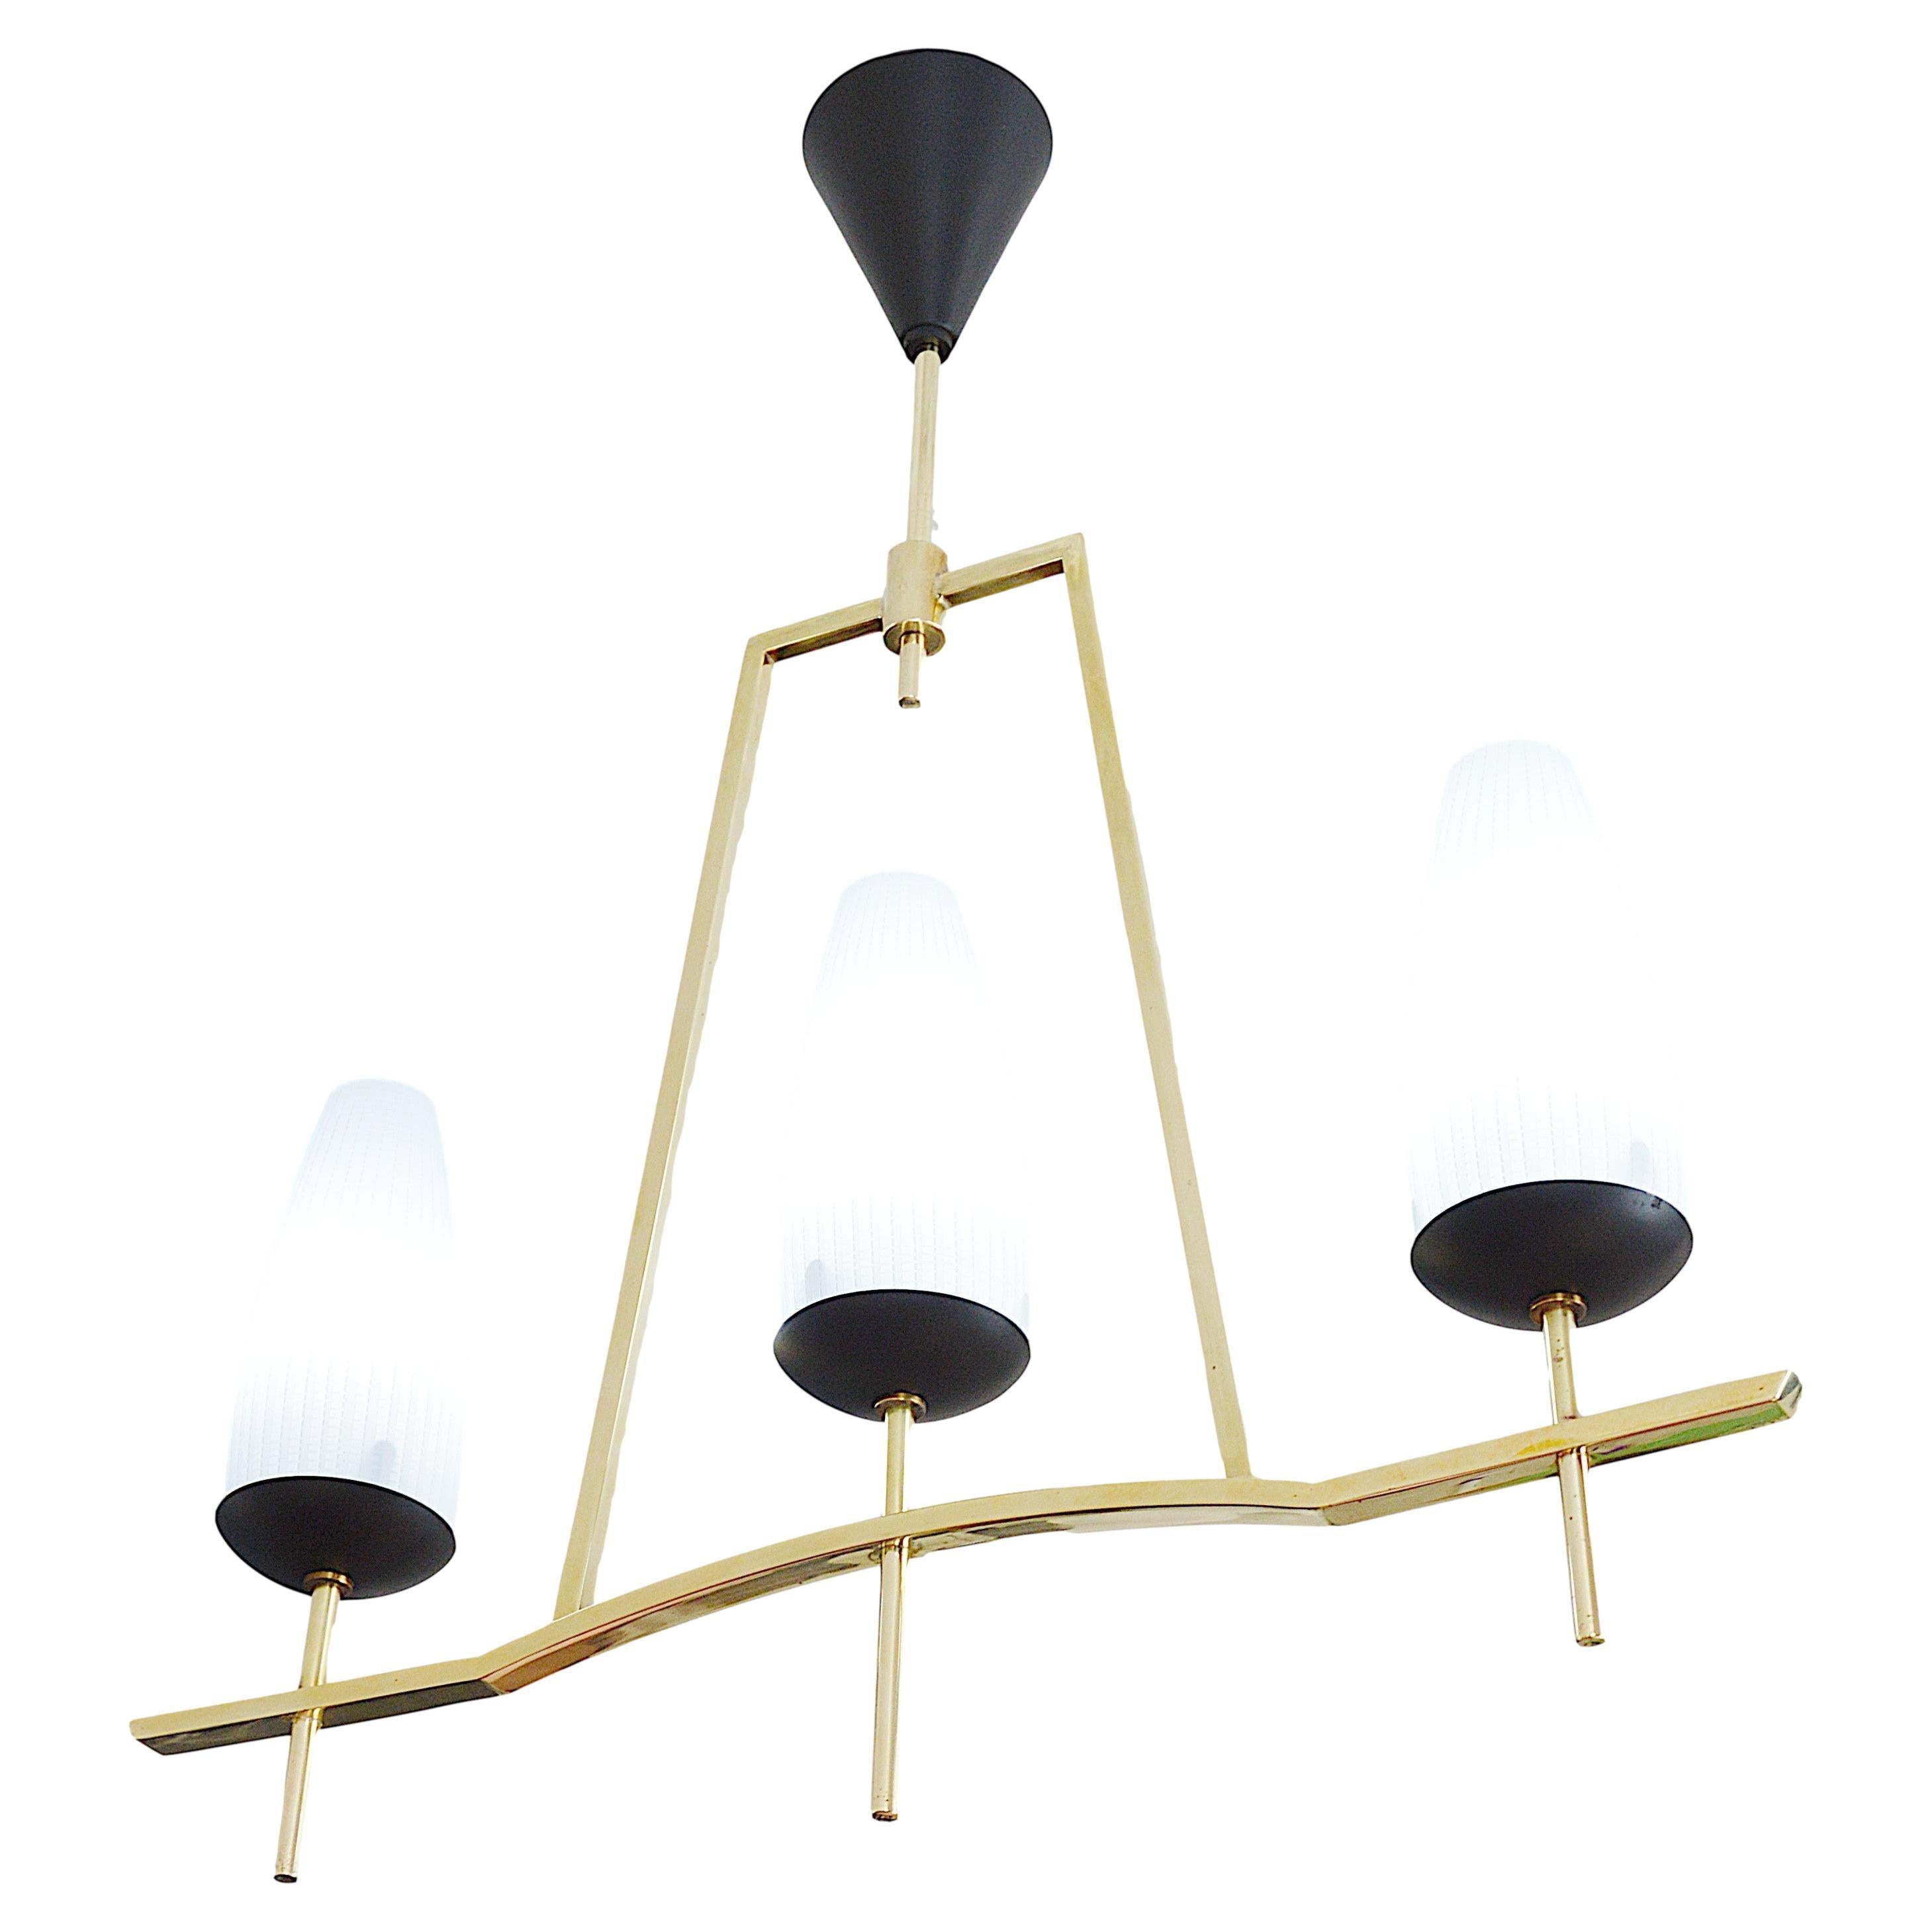 French mid-century chandelier by Lunel (Paris), France, 1950s. Brass, metal and glass. Measures: height 24.2